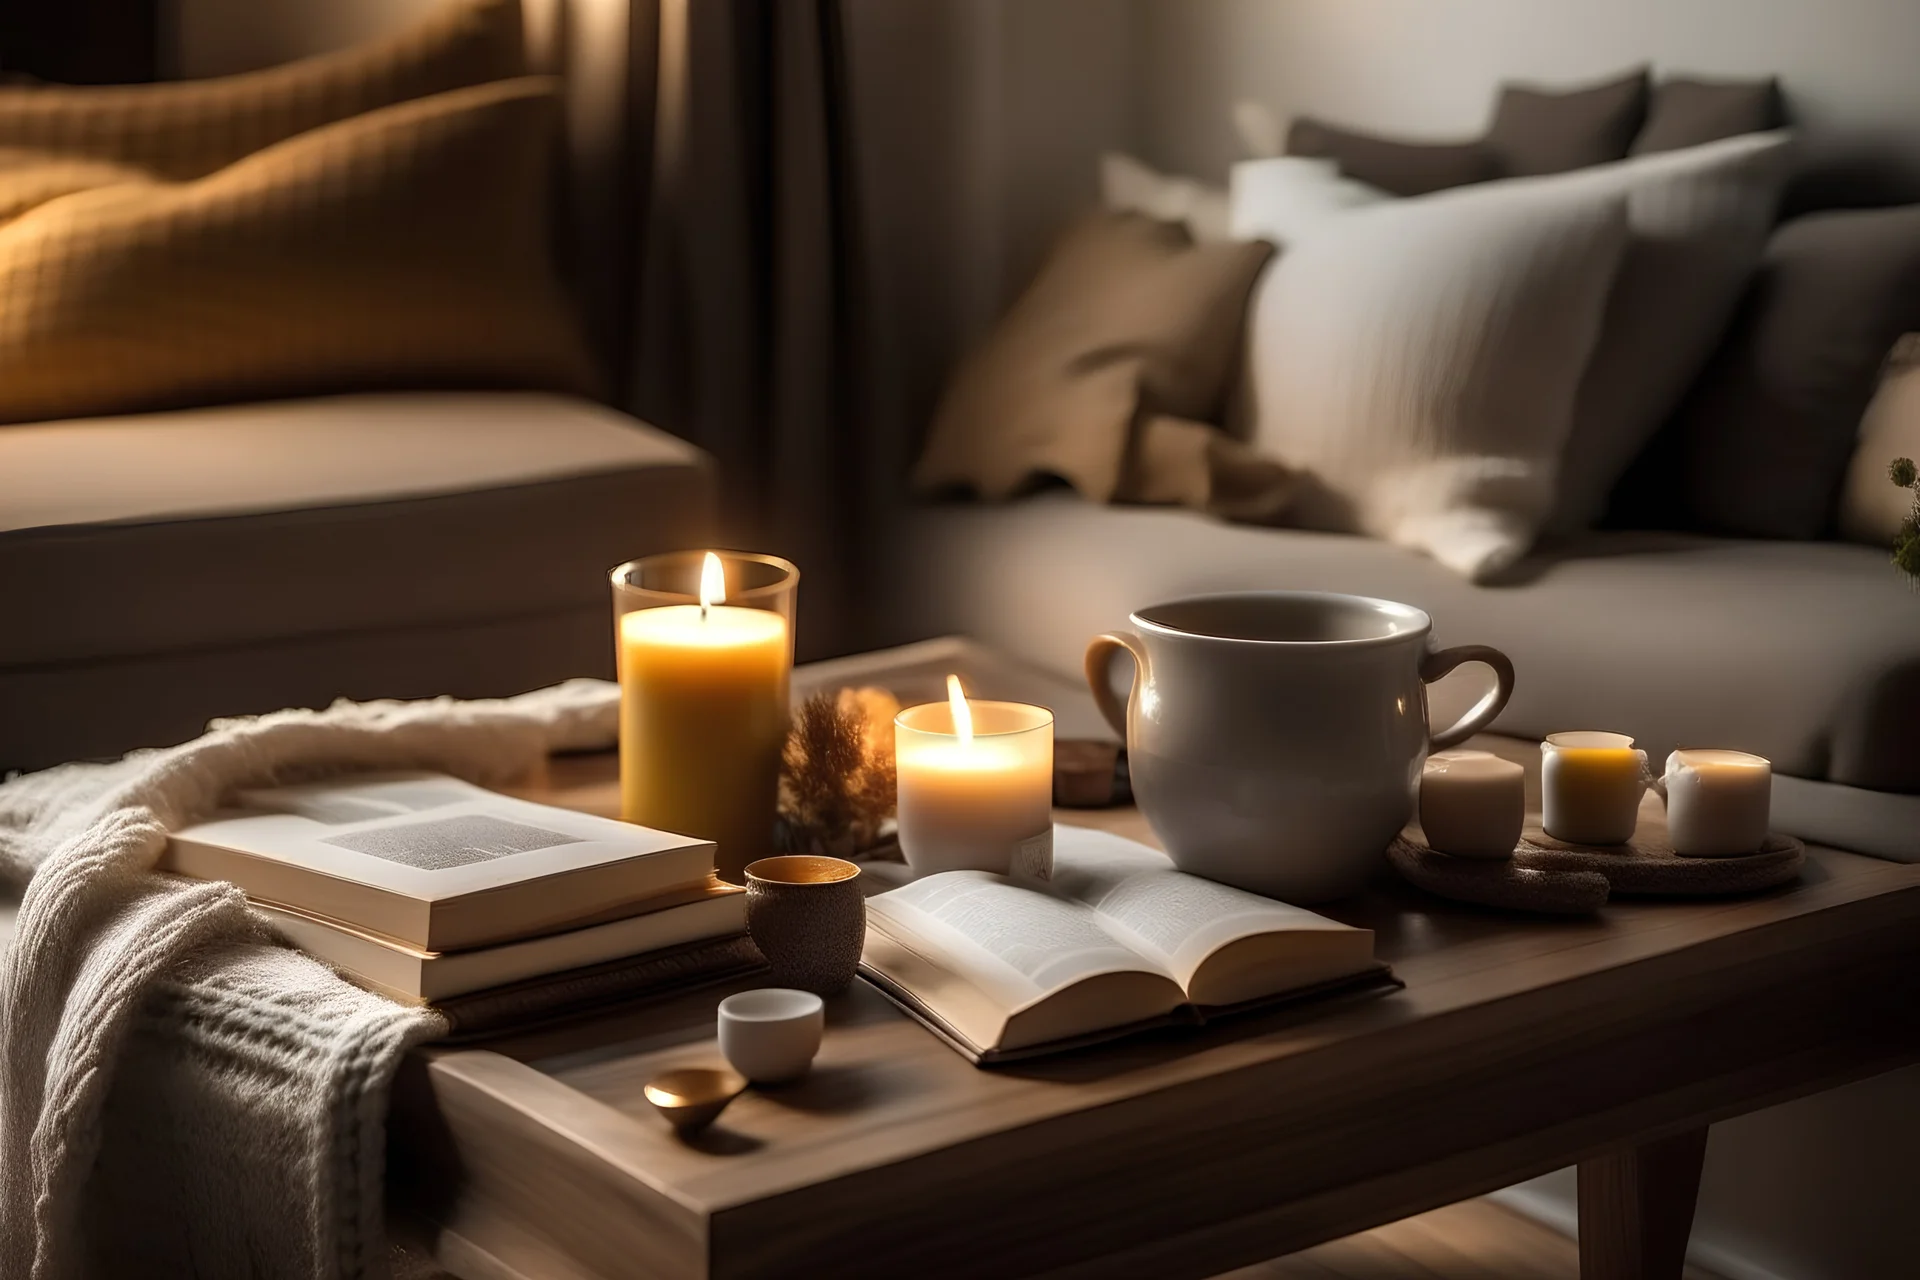 Craft a cozy feature image depicting a square coffee table with a focused cup of coffee styled with warm, inviting elements like candles, books, and a plush throw blanket, evoking a sense of comfort and relaxation.